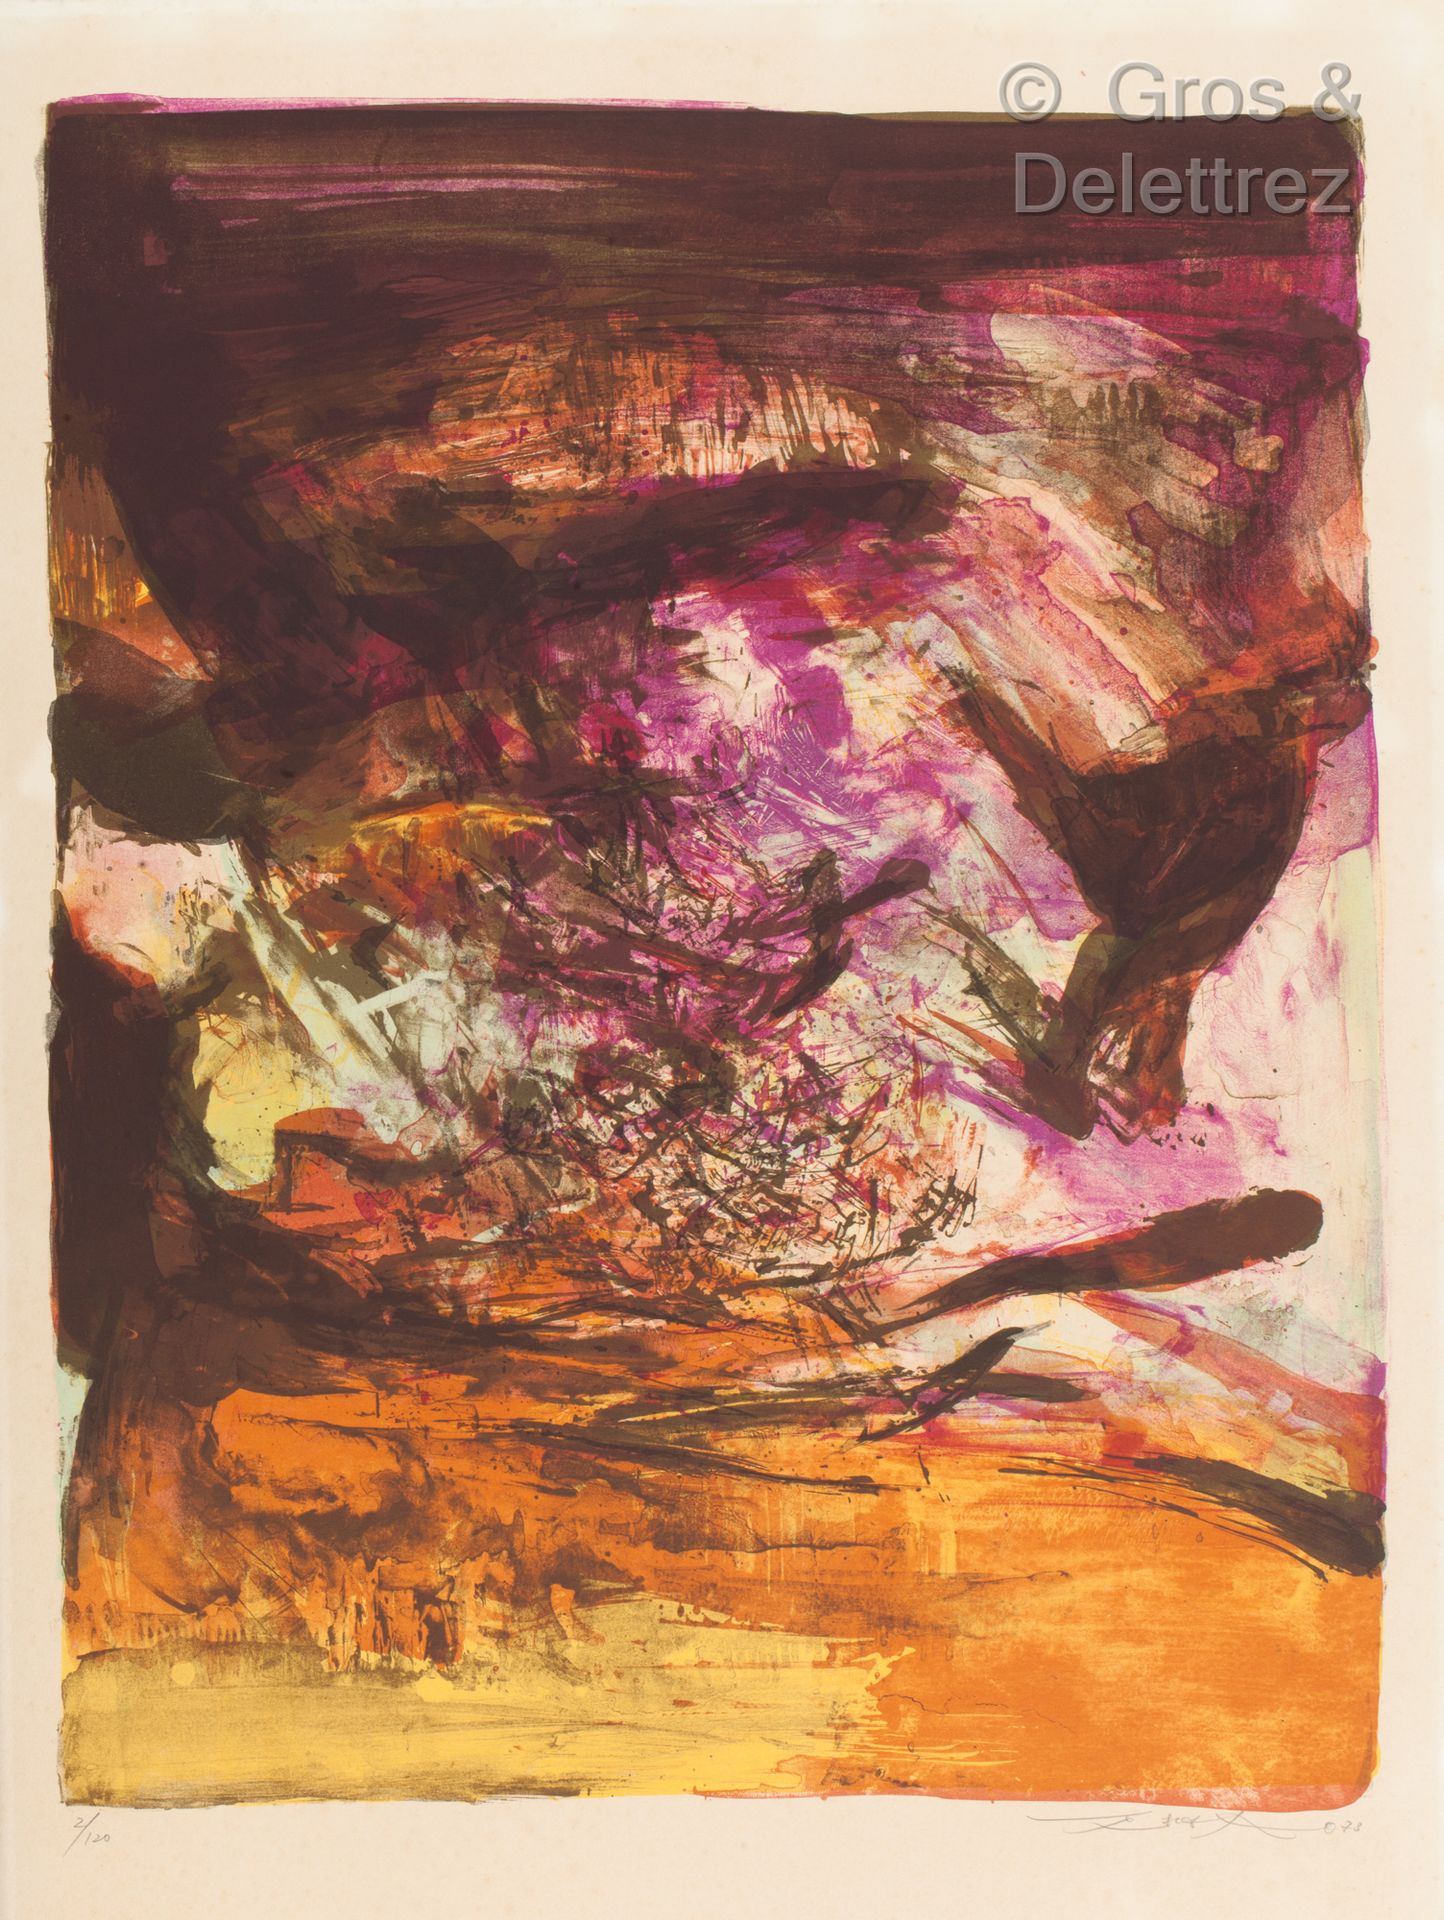 ZAO WOU-KI (1921-2013) Composition

Lithograph in colors. 

Signed and dated 73 &hellip;